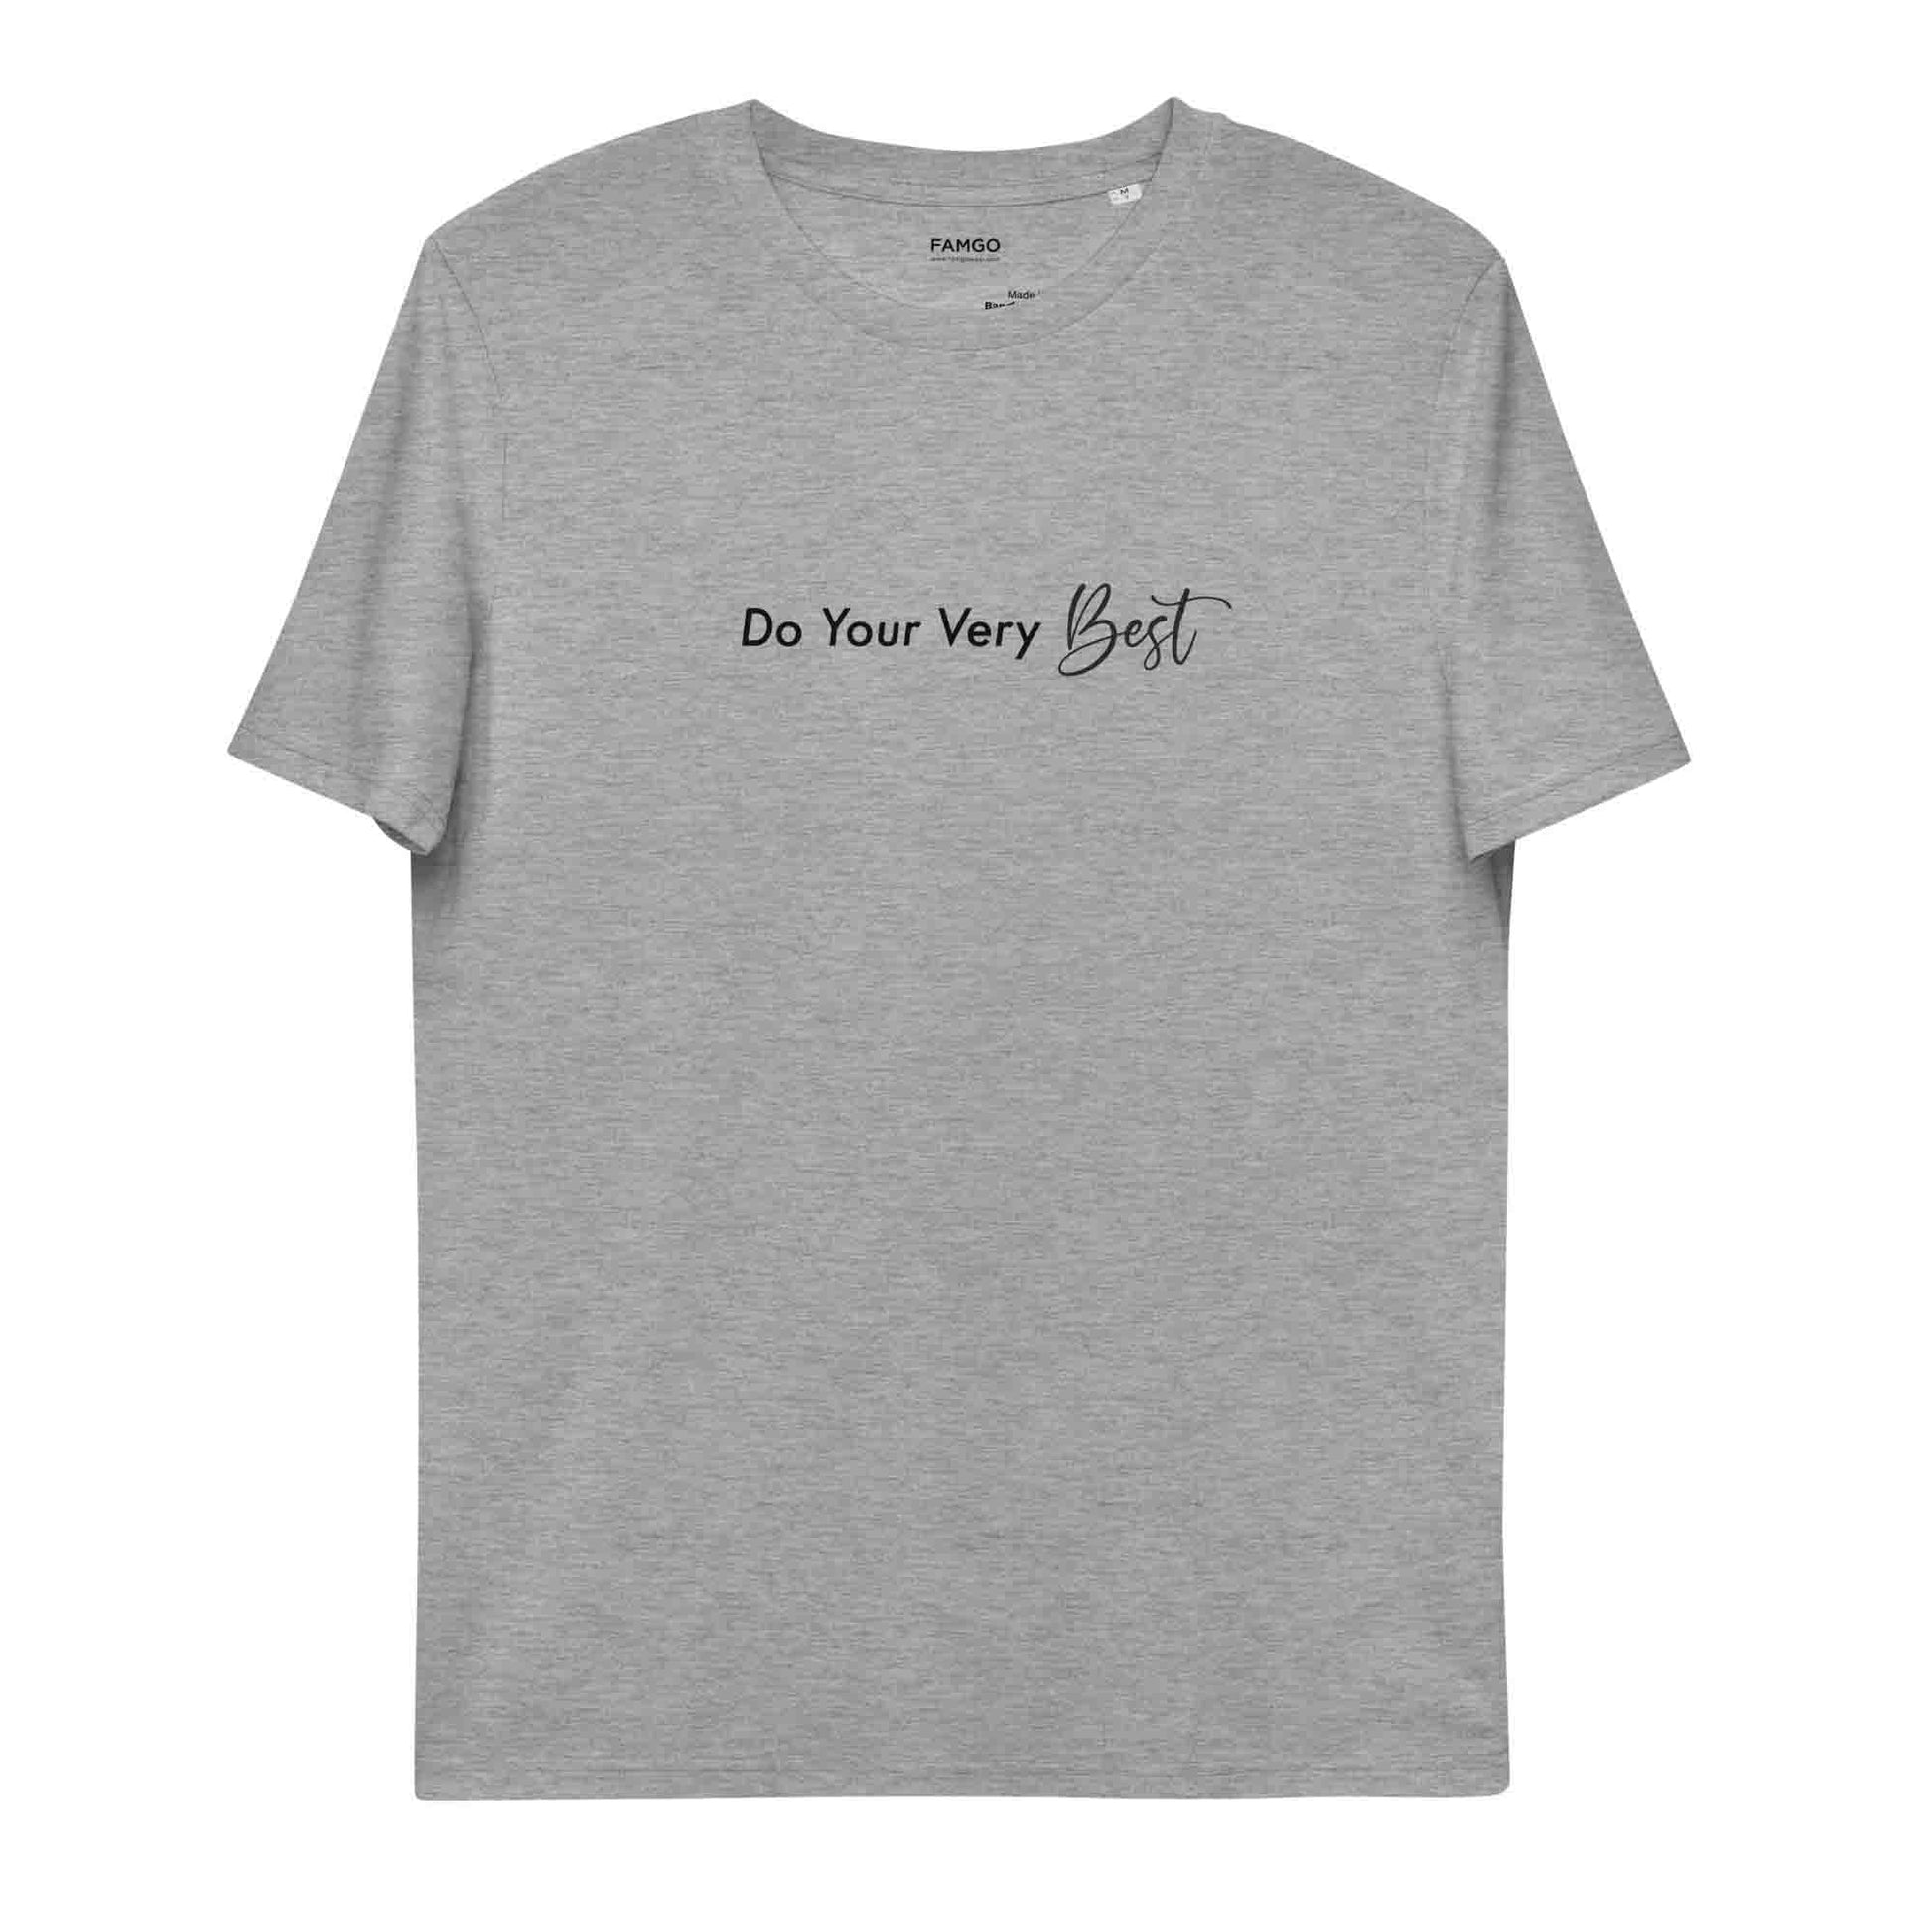 Women light gray motivational t-shirt with motivational quote, "Do Your Very Best."